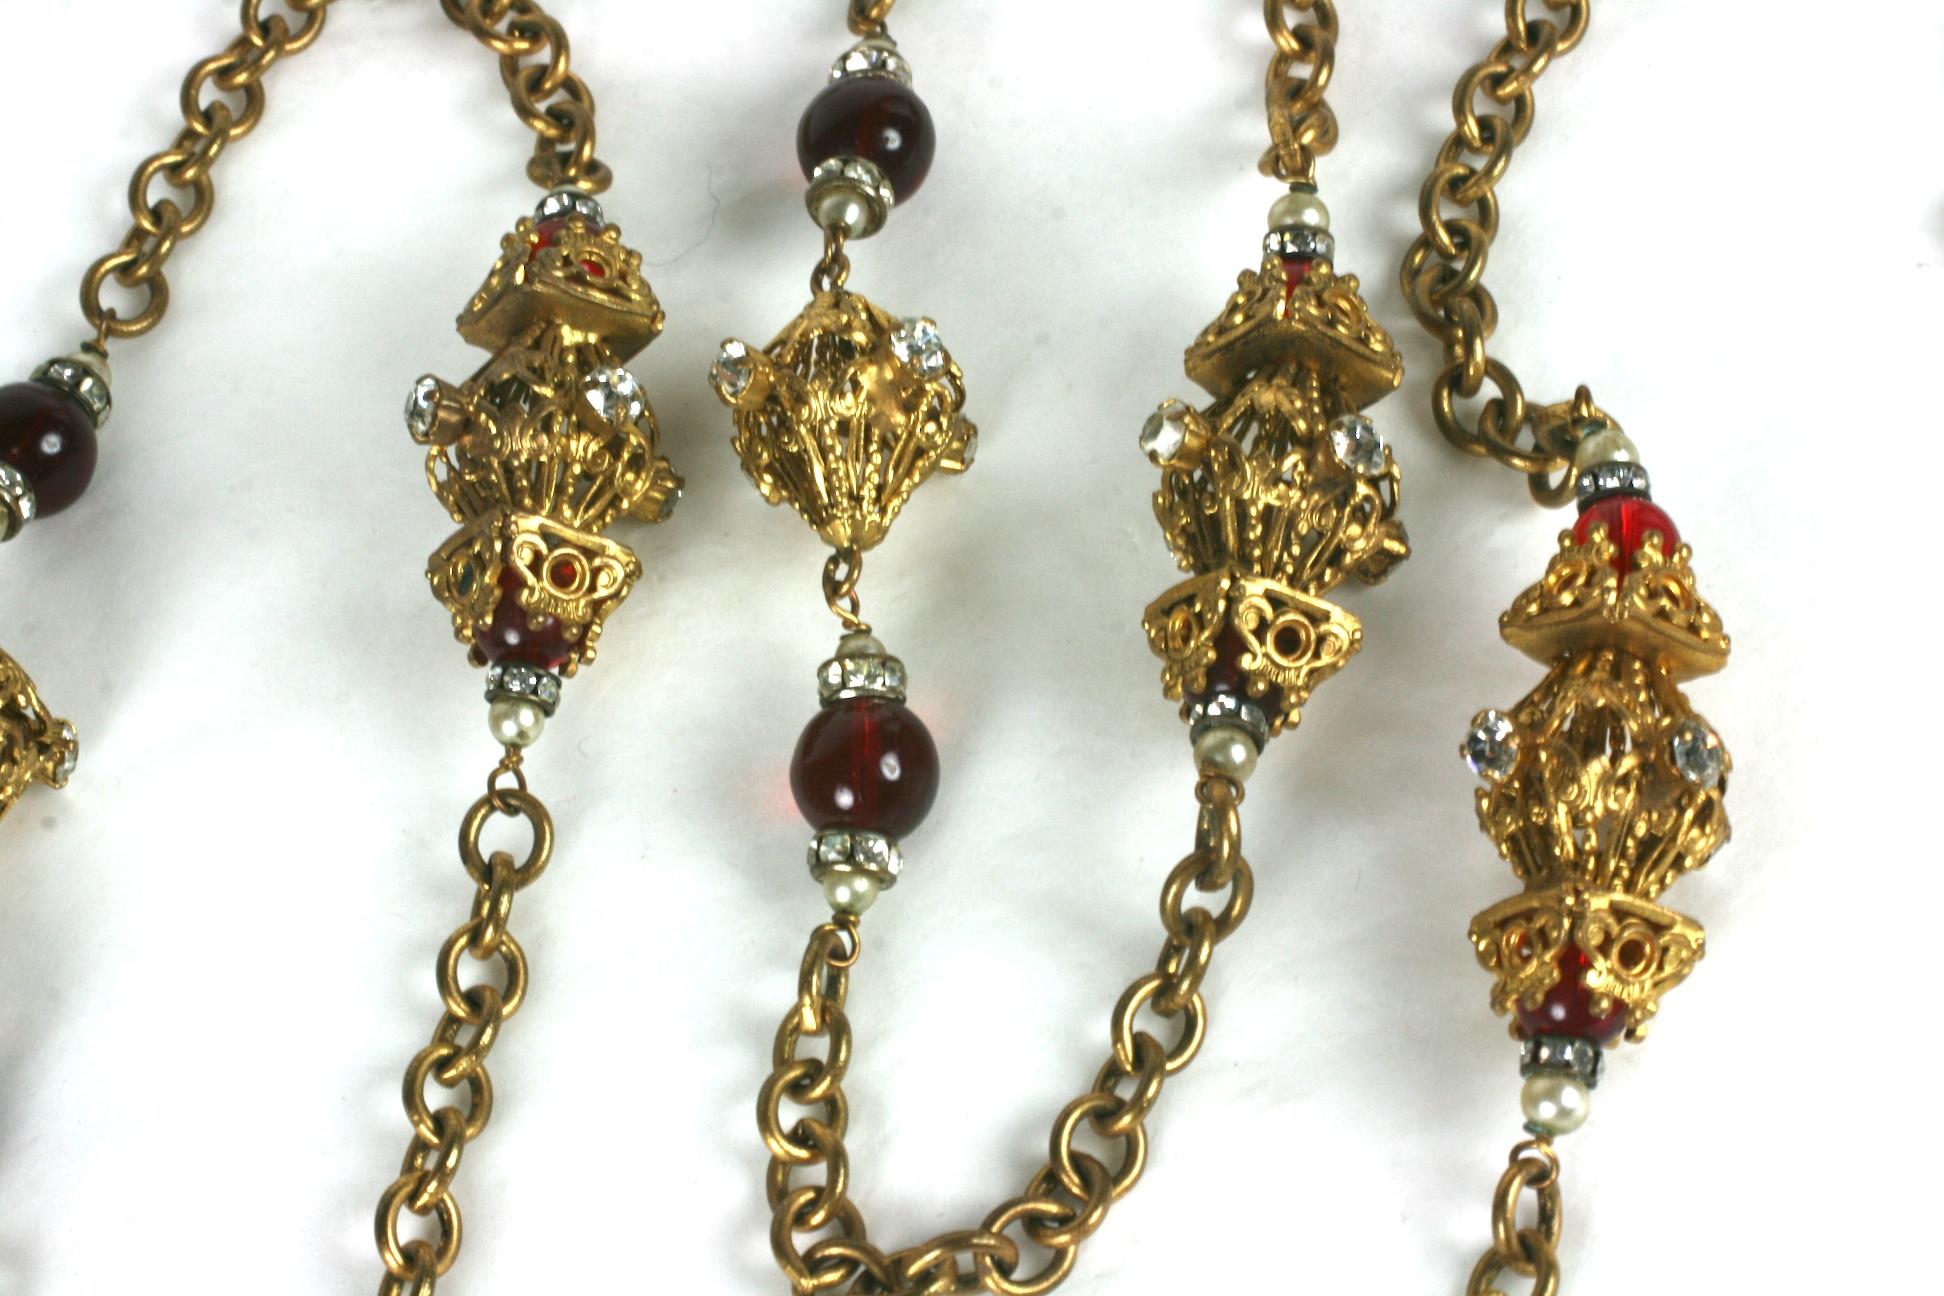 Early CoCo Chanel sautoir fabricated by Robert Goossens of Renaissance inspiration, composed of deep ruby pate de verre beads flanked by rondelles of crystal brilliants and small faux pearls. There are gilt filigree lantern shaped stations in two